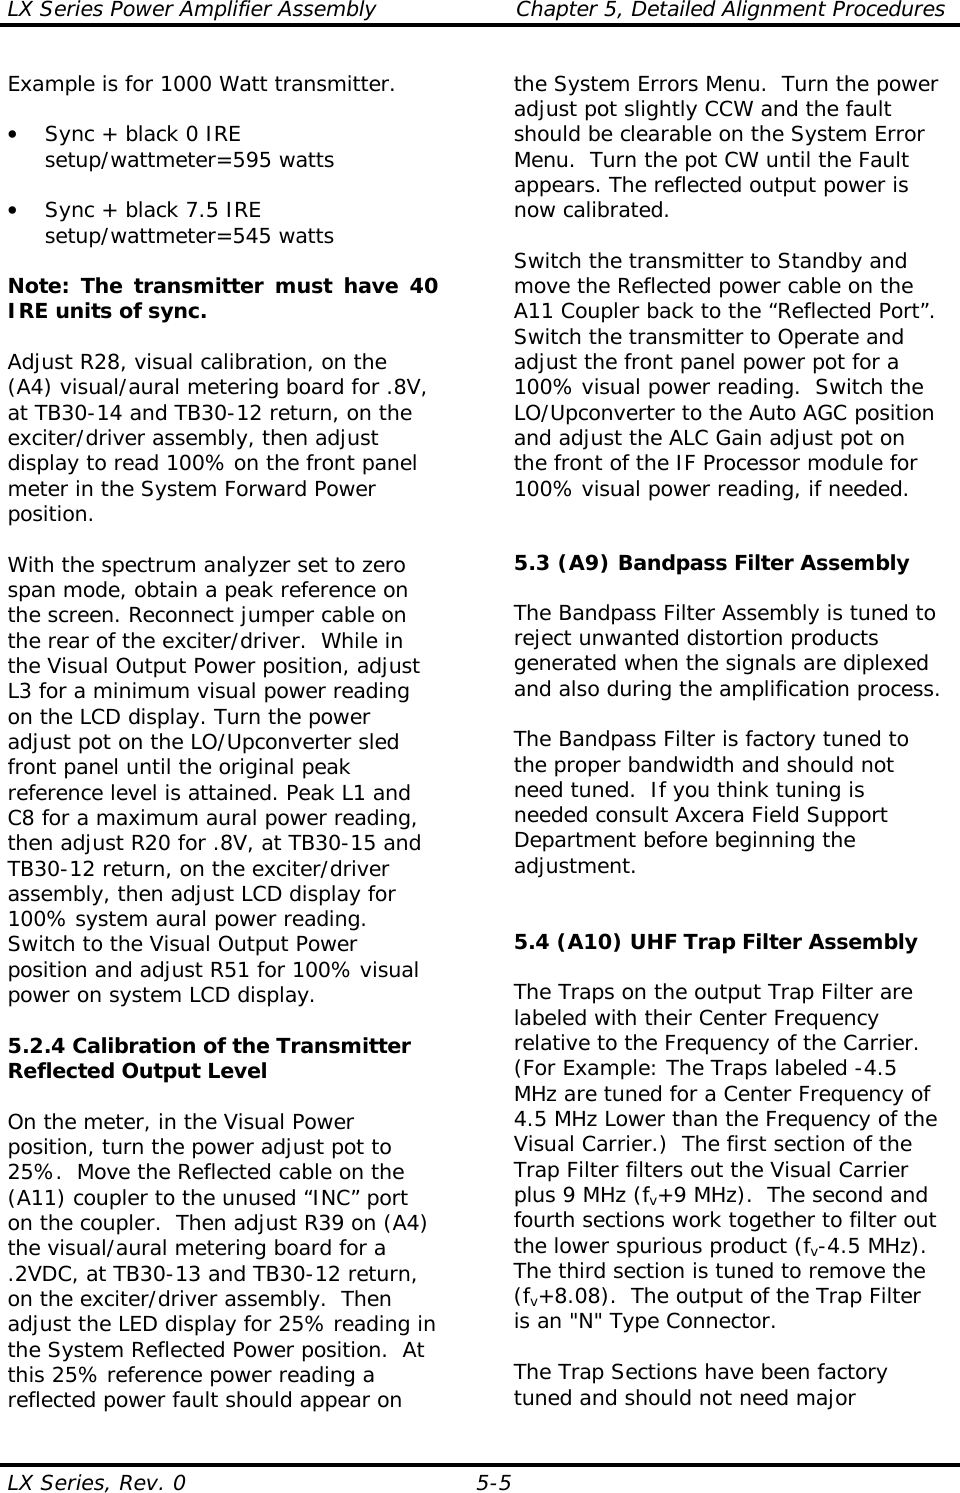 LX Series Power Amplifier Assembly  Chapter 5, Detailed Alignment Procedures  LX Series, Rev. 0  5-5 Example is for 1000 Watt transmitter.  •  Sync + black 0 IRE setup/wattmeter=595 watts  •  Sync + black 7.5 IRE setup/wattmeter=545 watts    Note: The transmitter must have 40 IRE units of sync.   Adjust R28, visual calibration, on the (A4) visual/aural metering board for .8V, at TB30-14 and TB30-12 return, on the exciter/driver assembly, then adjust display to read 100% on the front panel meter in the System Forward Power position.  With the spectrum analyzer set to zero span mode, obtain a peak reference on the screen. Reconnect jumper cable on the rear of the exciter/driver.  While in the Visual Output Power position, adjust L3 for a minimum visual power reading on the LCD display. Turn the power adjust pot on the LO/Upconverter sled front panel until the original peak reference level is attained. Peak L1 and C8 for a maximum aural power reading, then adjust R20 for .8V, at TB30-15 and TB30-12 return, on the exciter/driver assembly, then adjust LCD display for 100% system aural power reading. Switch to the Visual Output Power position and adjust R51 for 100% visual power on system LCD display.  5.2.4 Calibration of the Transmitter Reflected Output Level   On the meter, in the Visual Power position, turn the power adjust pot to 25%.  Move the Reflected cable on the (A11) coupler to the unused “INC” port on the coupler.  Then adjust R39 on (A4) the visual/aural metering board for a .2VDC, at TB30-13 and TB30-12 return, on the exciter/driver assembly.  Then adjust the LED display for 25% reading in the System Reflected Power position.  At this 25% reference power reading a reflected power fault should appear on the System Errors Menu.  Turn the power adjust pot slightly CCW and the fault should be clearable on the System Error Menu.  Turn the pot CW until the Fault appears. The reflected output power is now calibrated.    Switch the transmitter to Standby and move the Reflected power cable on the A11 Coupler back to the “Reflected Port”. Switch the transmitter to Operate and adjust the front panel power pot for a 100% visual power reading.  Switch the LO/Upconverter to the Auto AGC position and adjust the ALC Gain adjust pot on the front of the IF Processor module for 100% visual power reading, if needed.   5.3 (A9) Bandpass Filter Assembly   The Bandpass Filter Assembly is tuned to reject unwanted distortion products generated when the signals are diplexed and also during the amplification process.  The Bandpass Filter is factory tuned to the proper bandwidth and should not need tuned.  If you think tuning is needed consult Axcera Field Support Department before beginning the adjustment.   5.4 (A10) UHF Trap Filter Assembly  The Traps on the output Trap Filter are labeled with their Center Frequency relative to the Frequency of the Carrier.  (For Example: The Traps labeled -4.5 MHz are tuned for a Center Frequency of 4.5 MHz Lower than the Frequency of the Visual Carrier.)  The first section of the Trap Filter filters out the Visual Carrier plus 9 MHz (fv+9 MHz).  The second and fourth sections work together to filter out the lower spurious product (fv-4.5 MHz).  The third section is tuned to remove the (fv+8.08).  The output of the Trap Filter is an &quot;N&quot; Type Connector.  The Trap Sections have been factory tuned and should not need major 